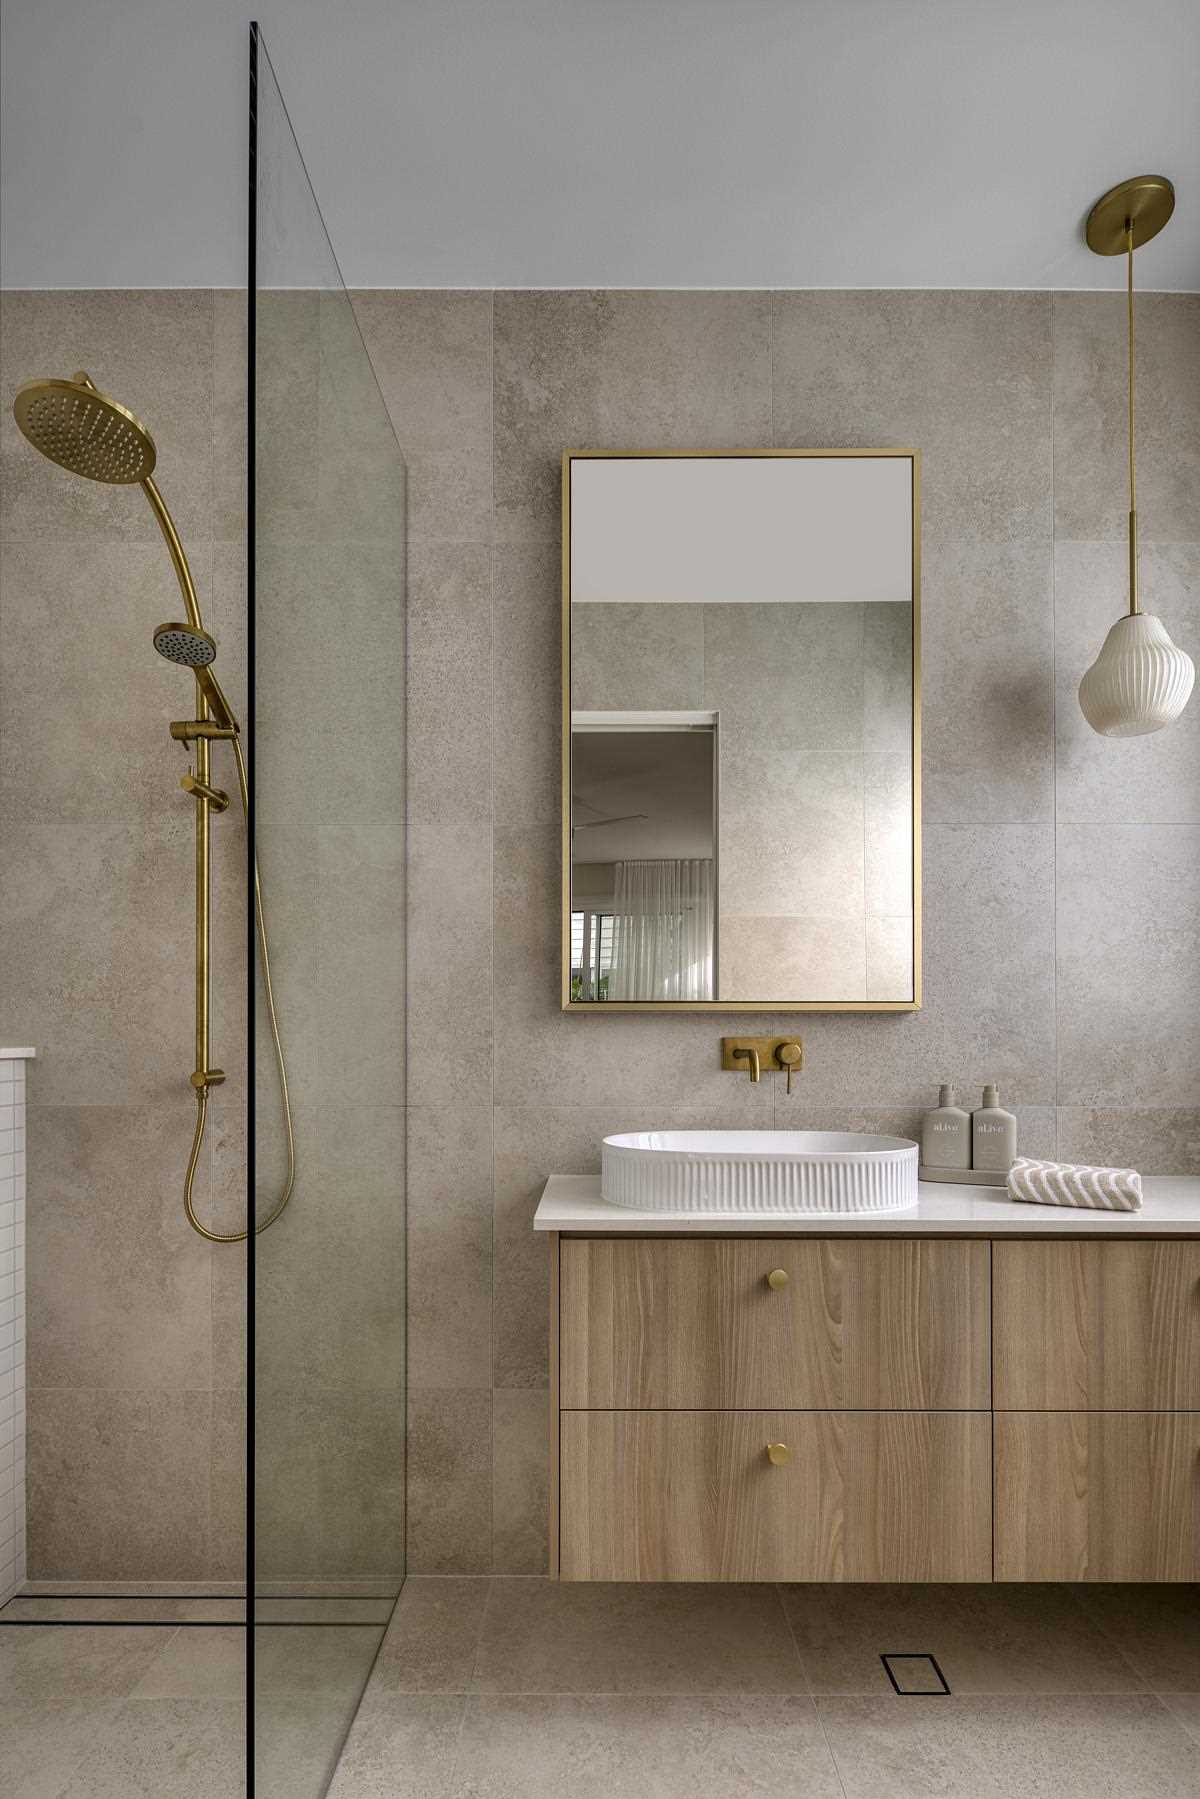 In this modern bathroom, natural elements, like wood and stone, have been paired with metallic accents for a contemporary look.